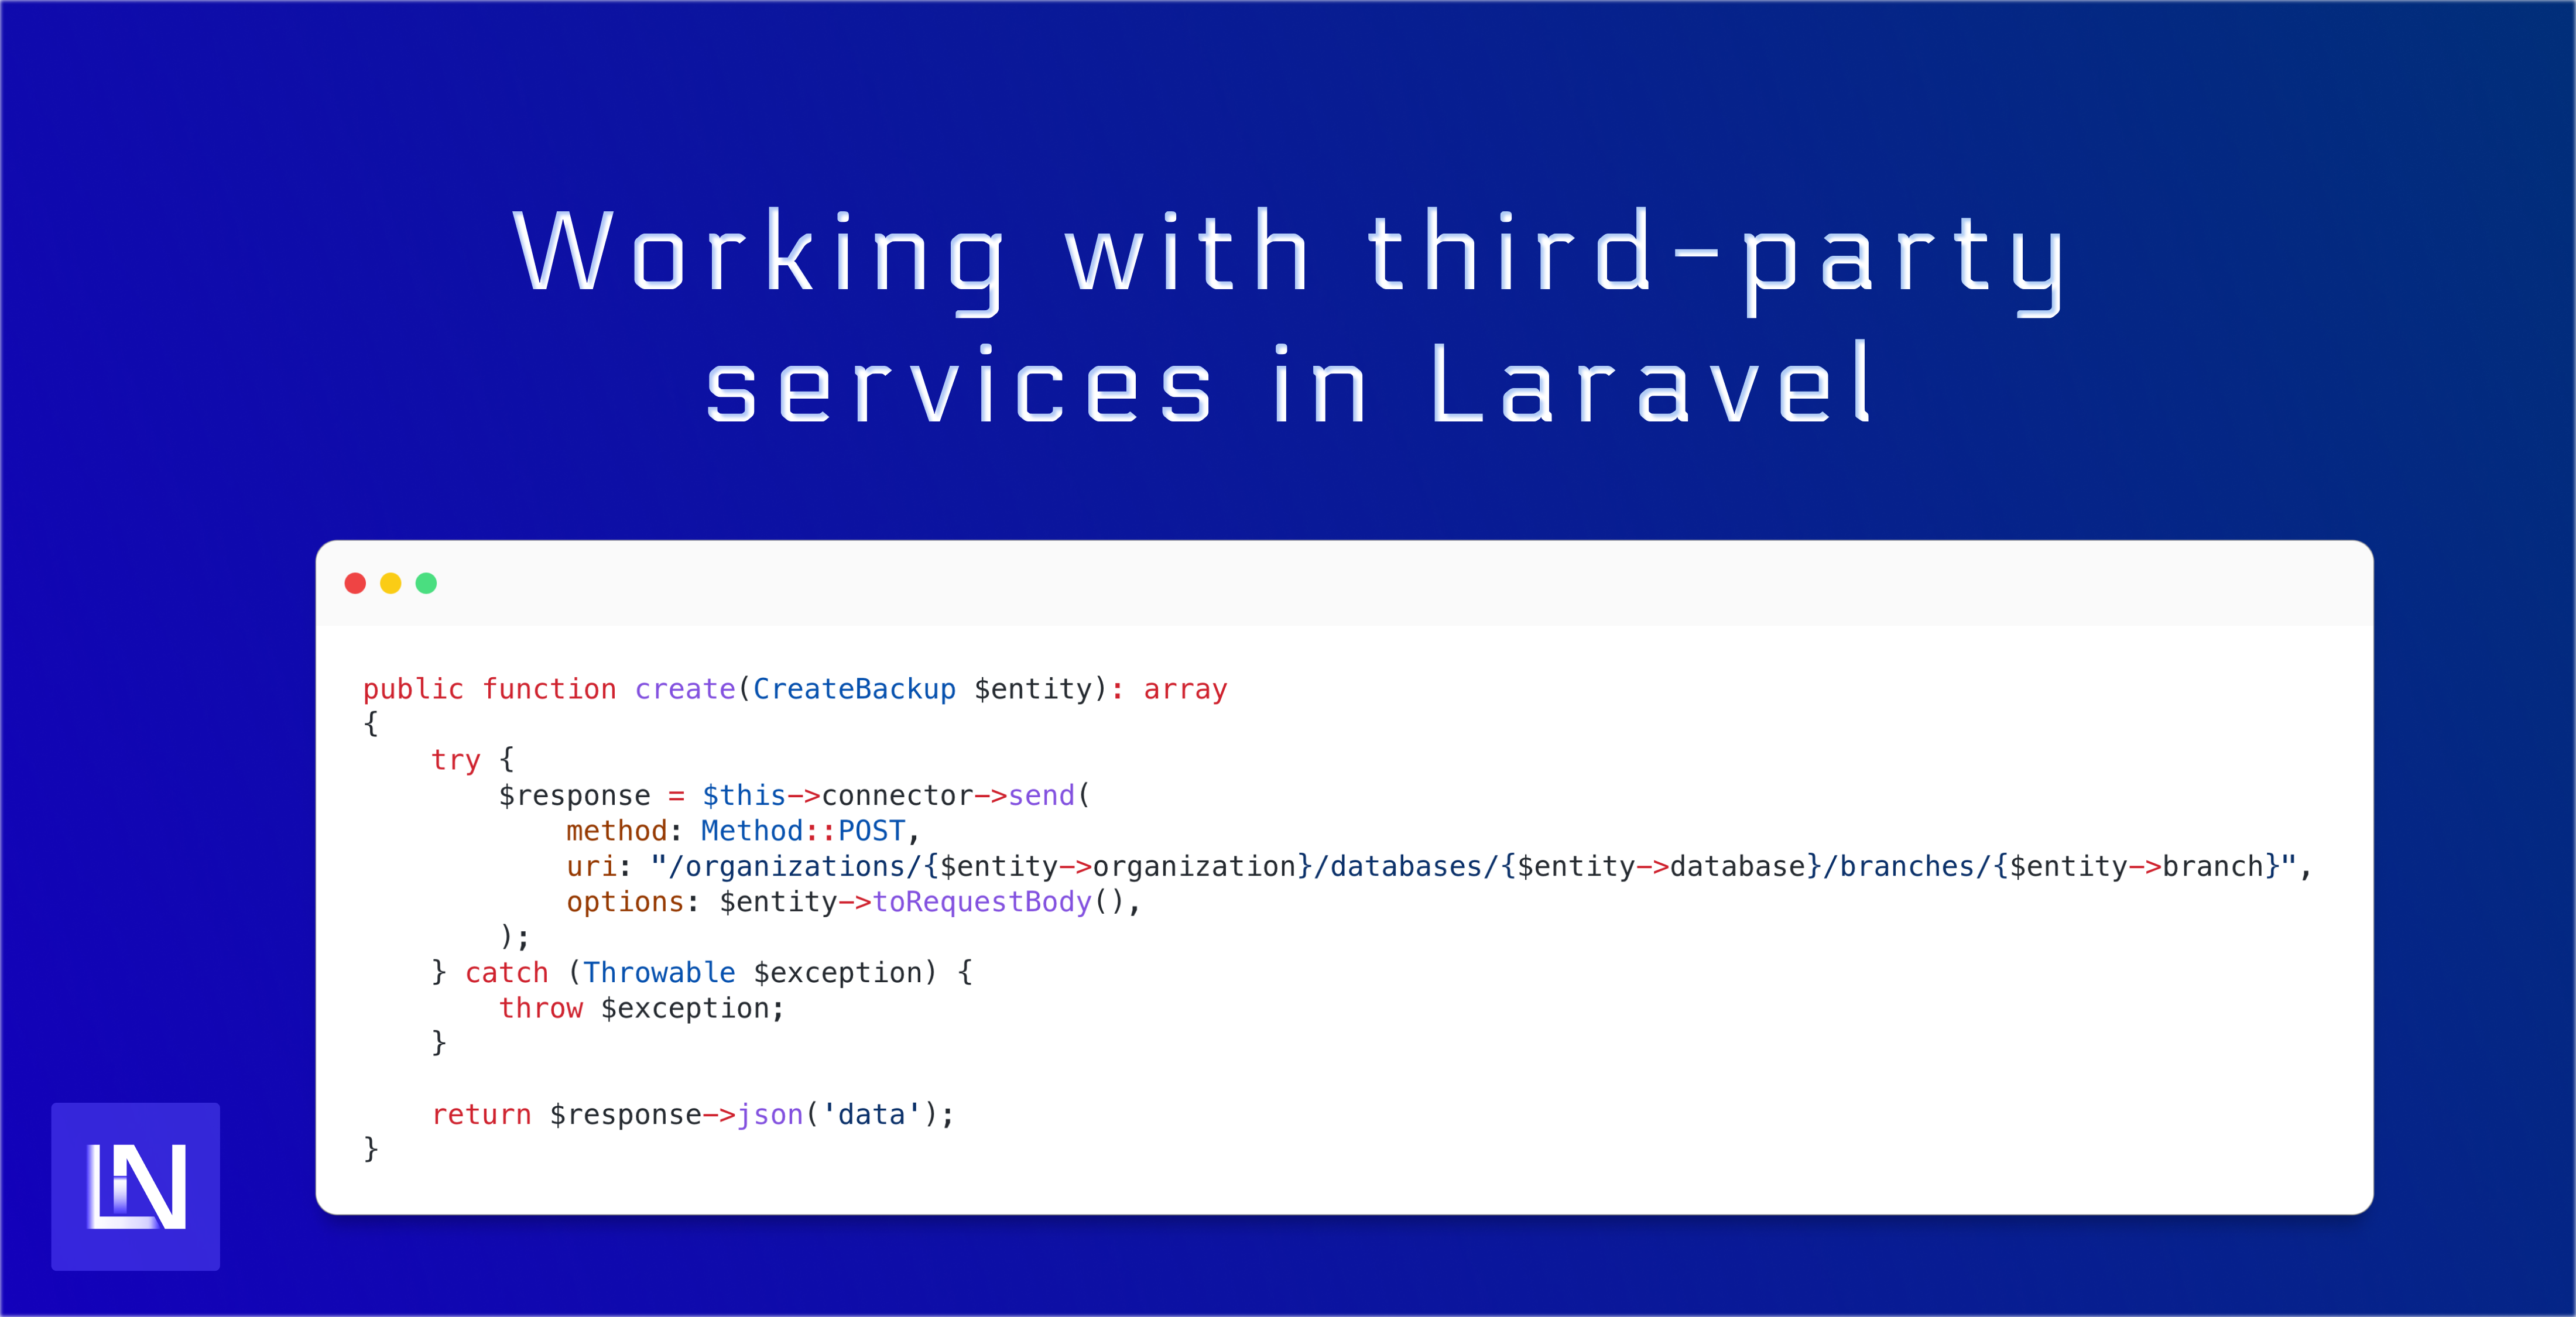 Working with third party services in laravel image